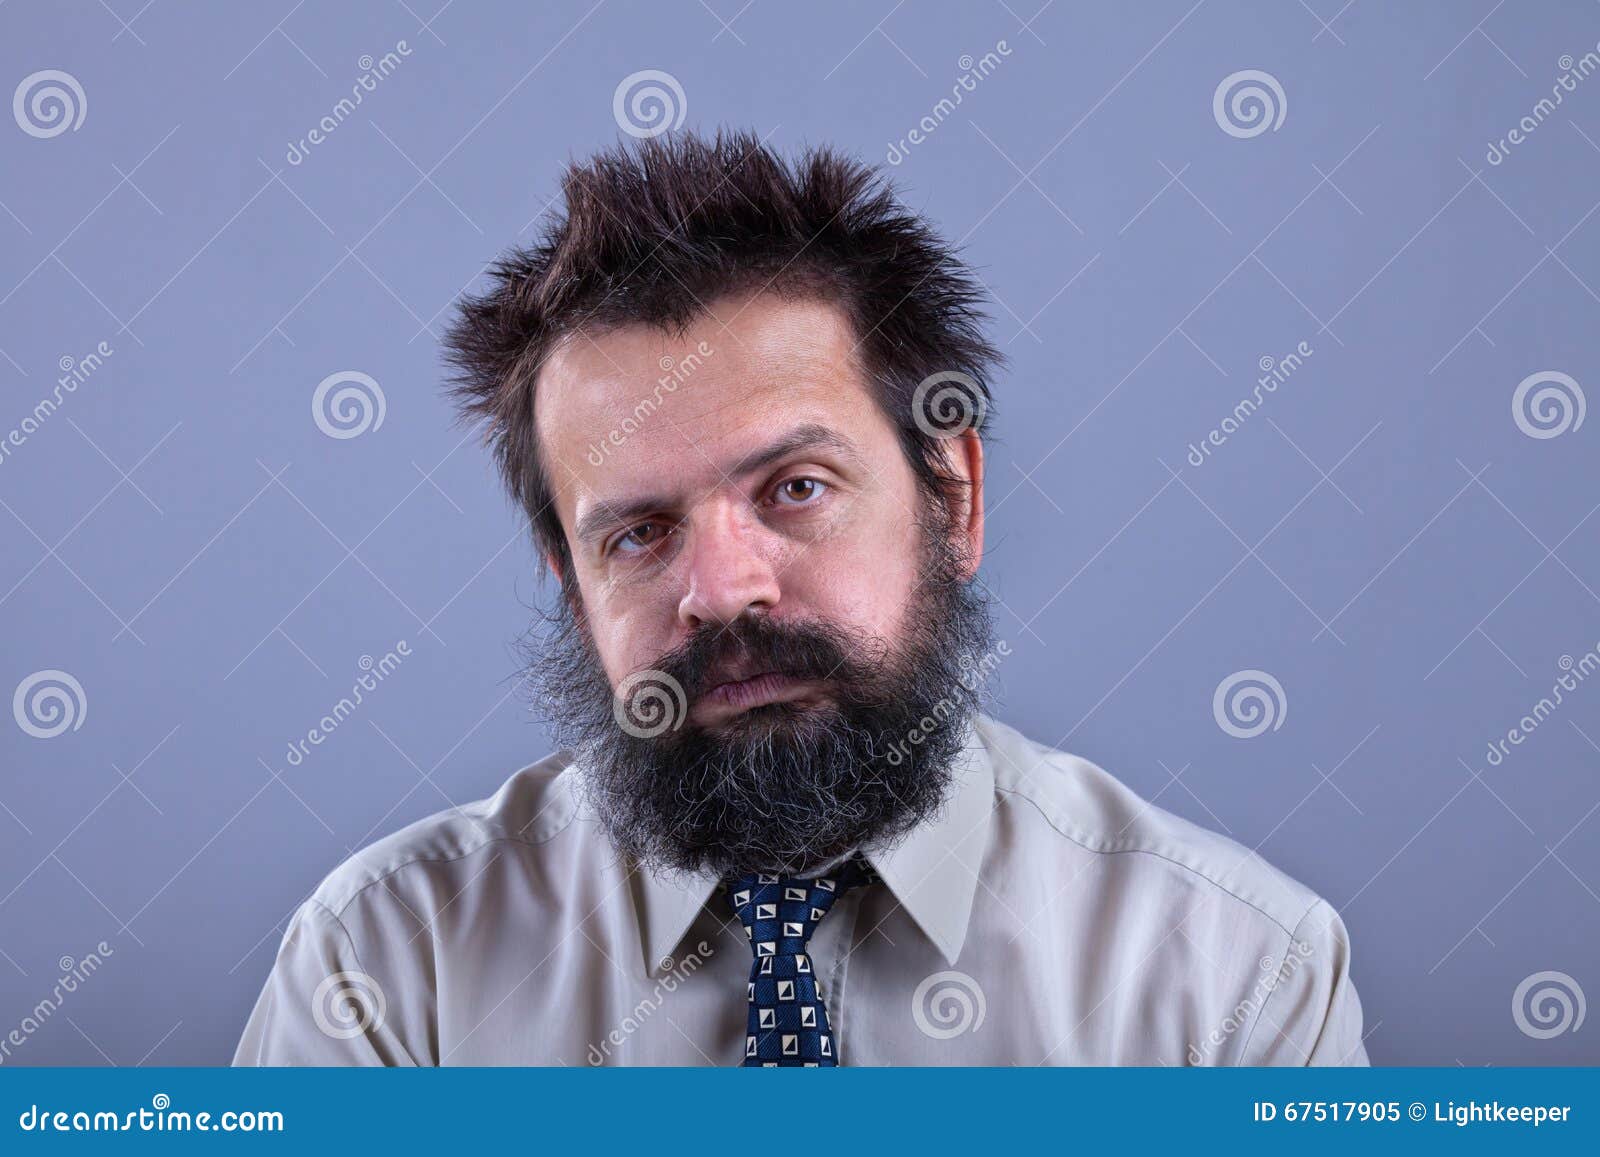 exhausted man with bushy hair and beard